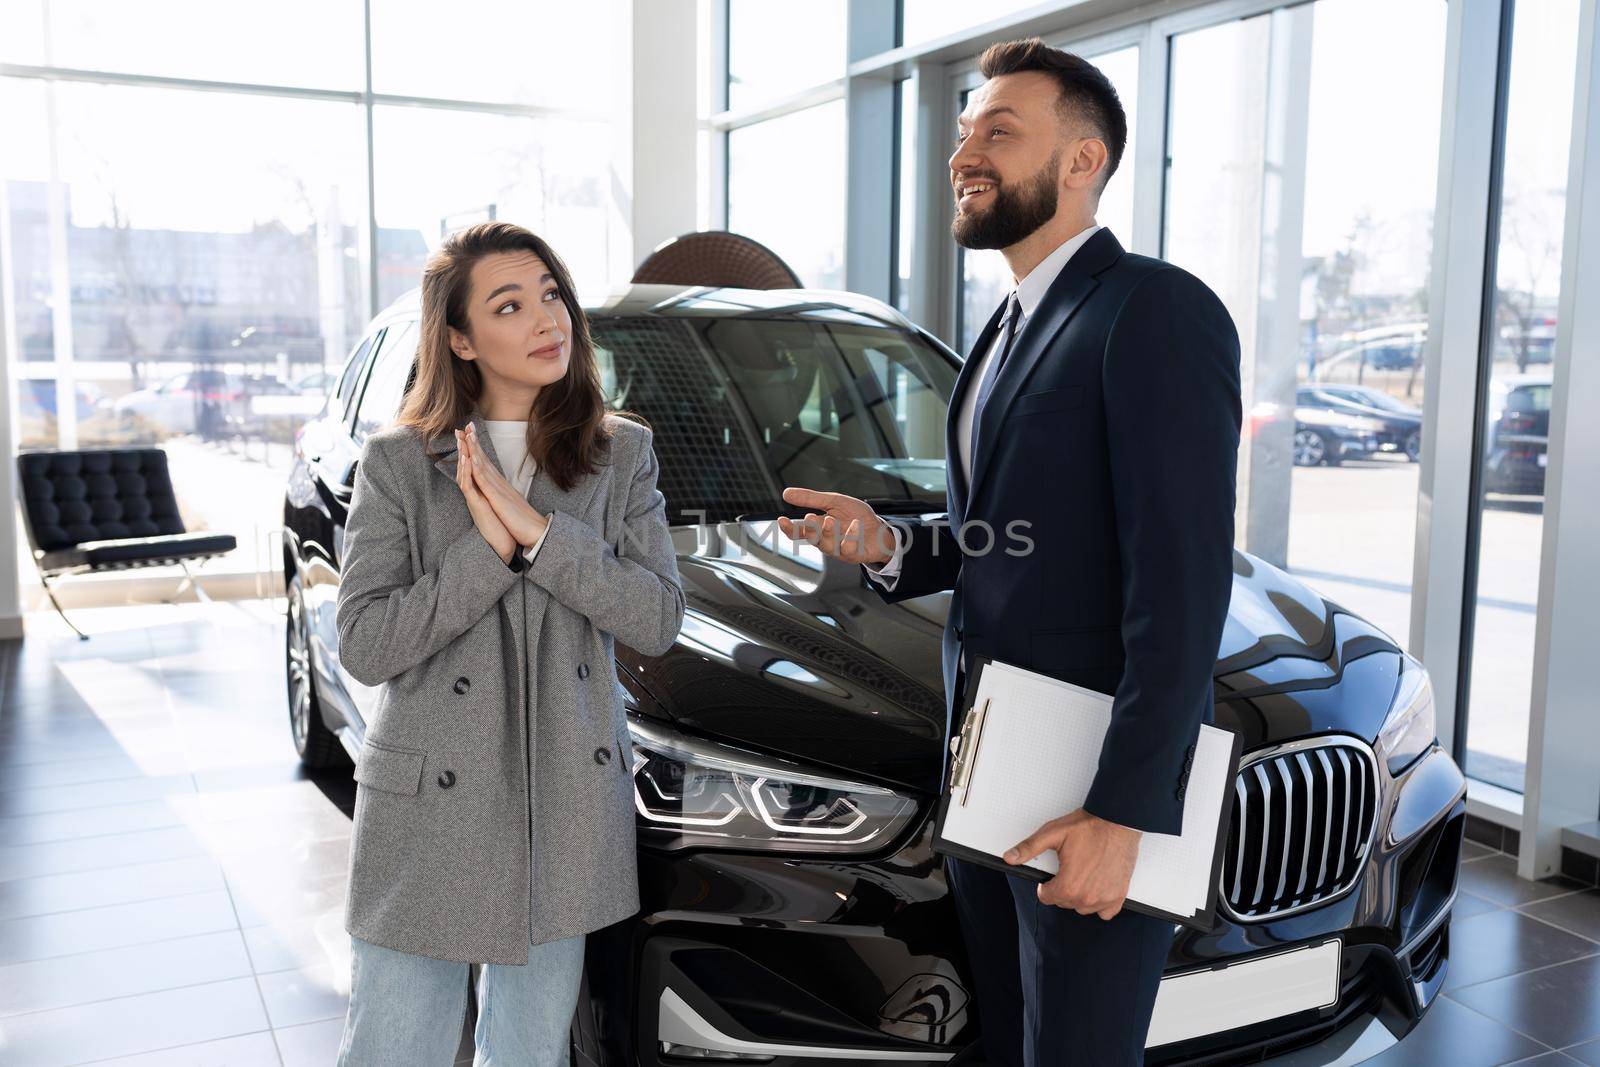 car dealership employee talking about new car model to woman buyer.